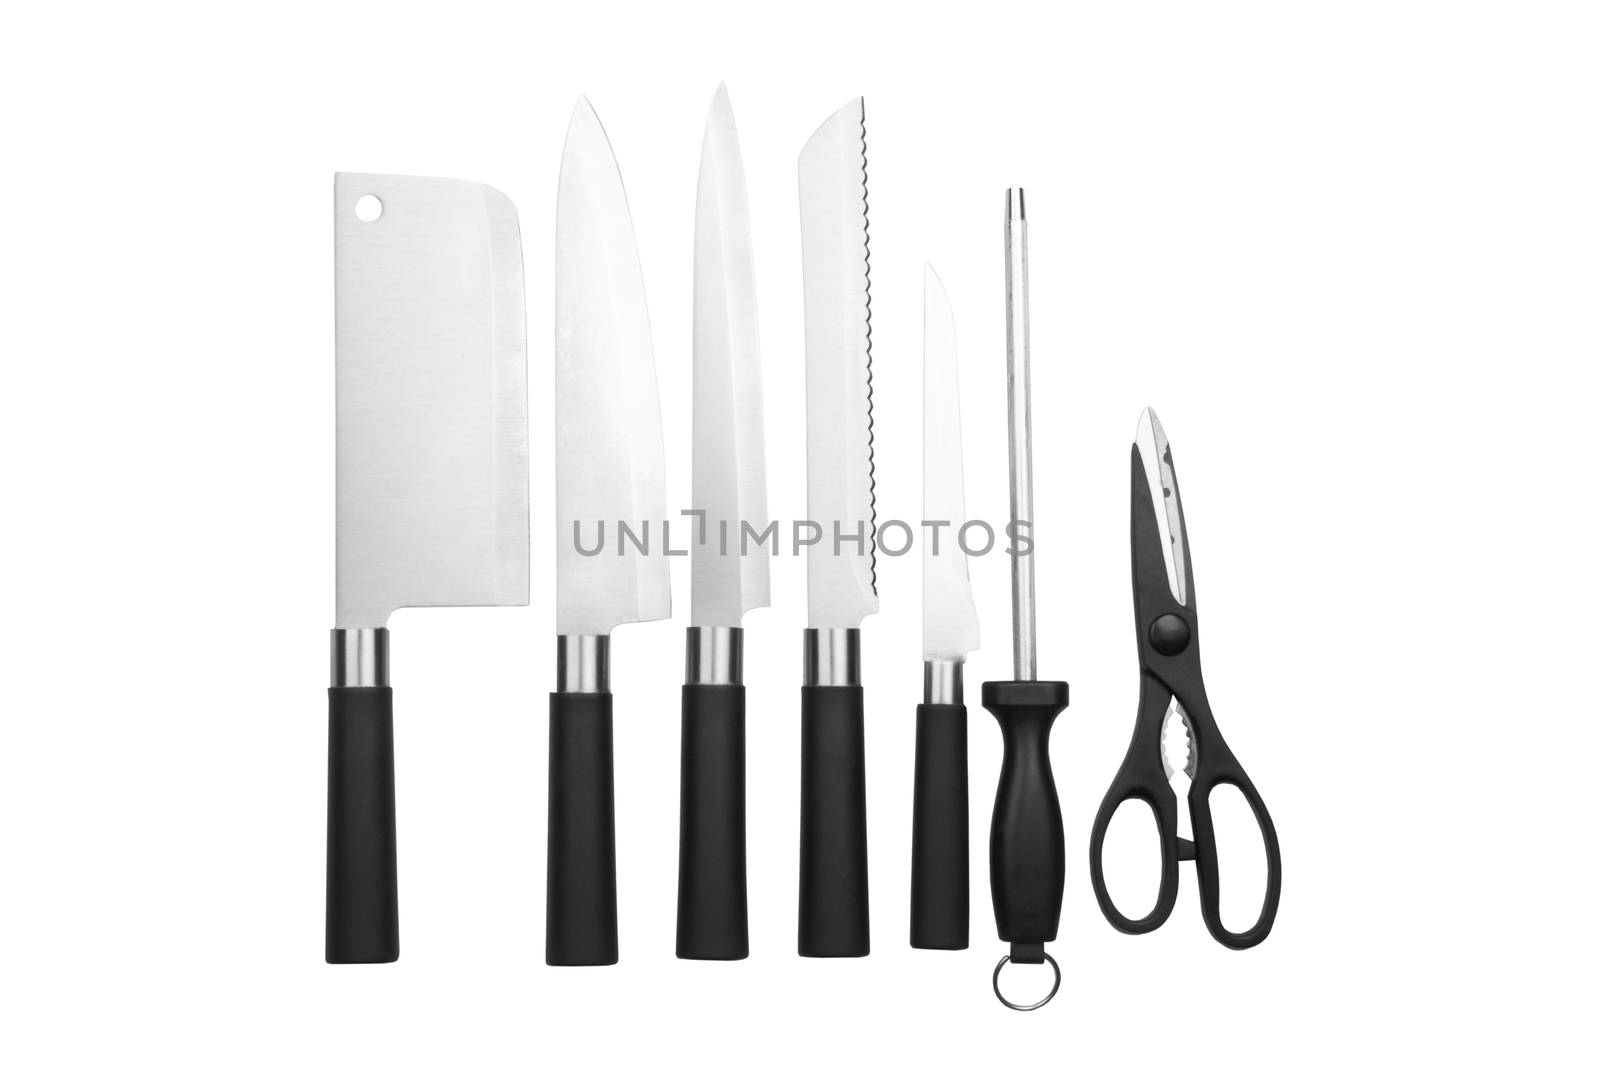 a kitchen knives set isolated on a white background, tableware